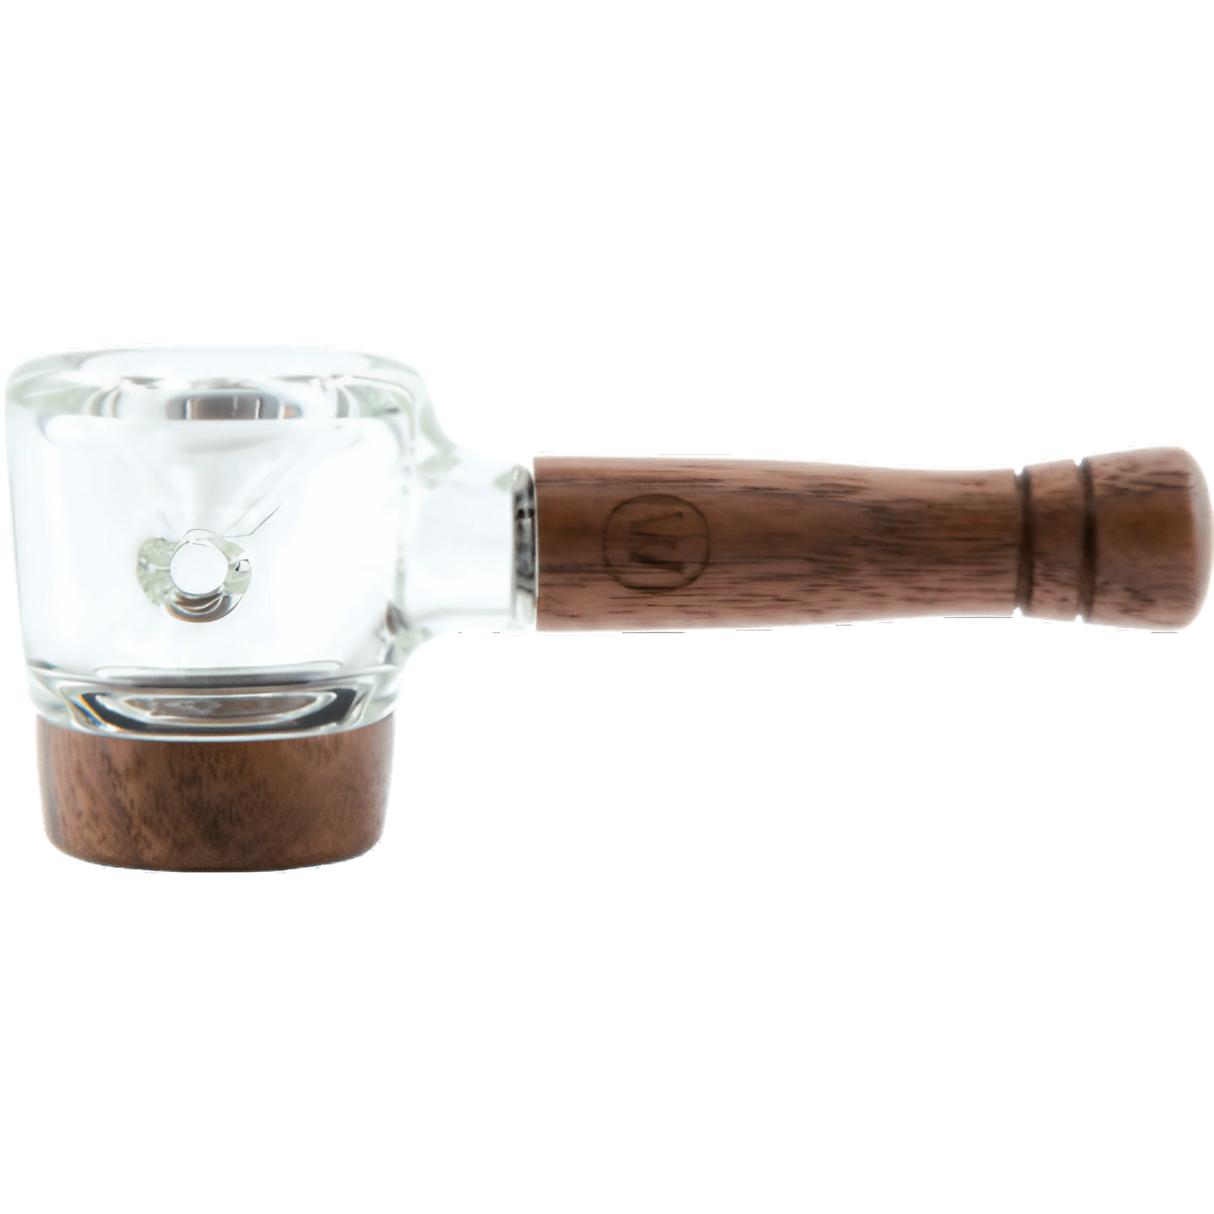 Marley Natural Spoon Pipe with Clear Borosilicate Glass Bowl and Black Walnut Handle - Side View